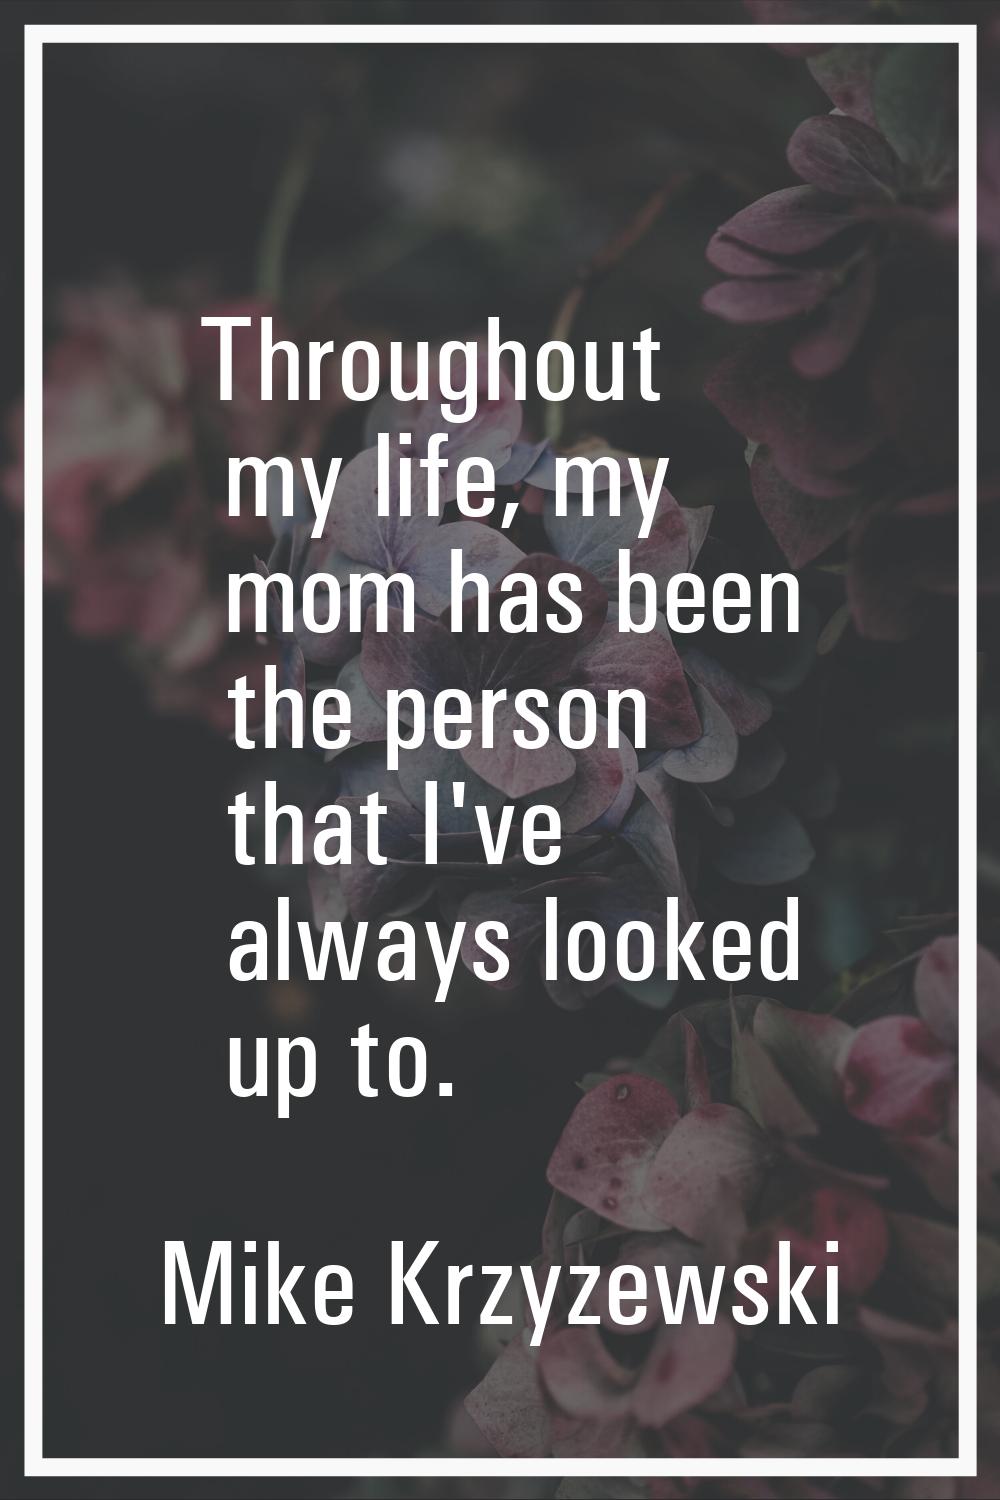 Throughout my life, my mom has been the person that I've always looked up to.